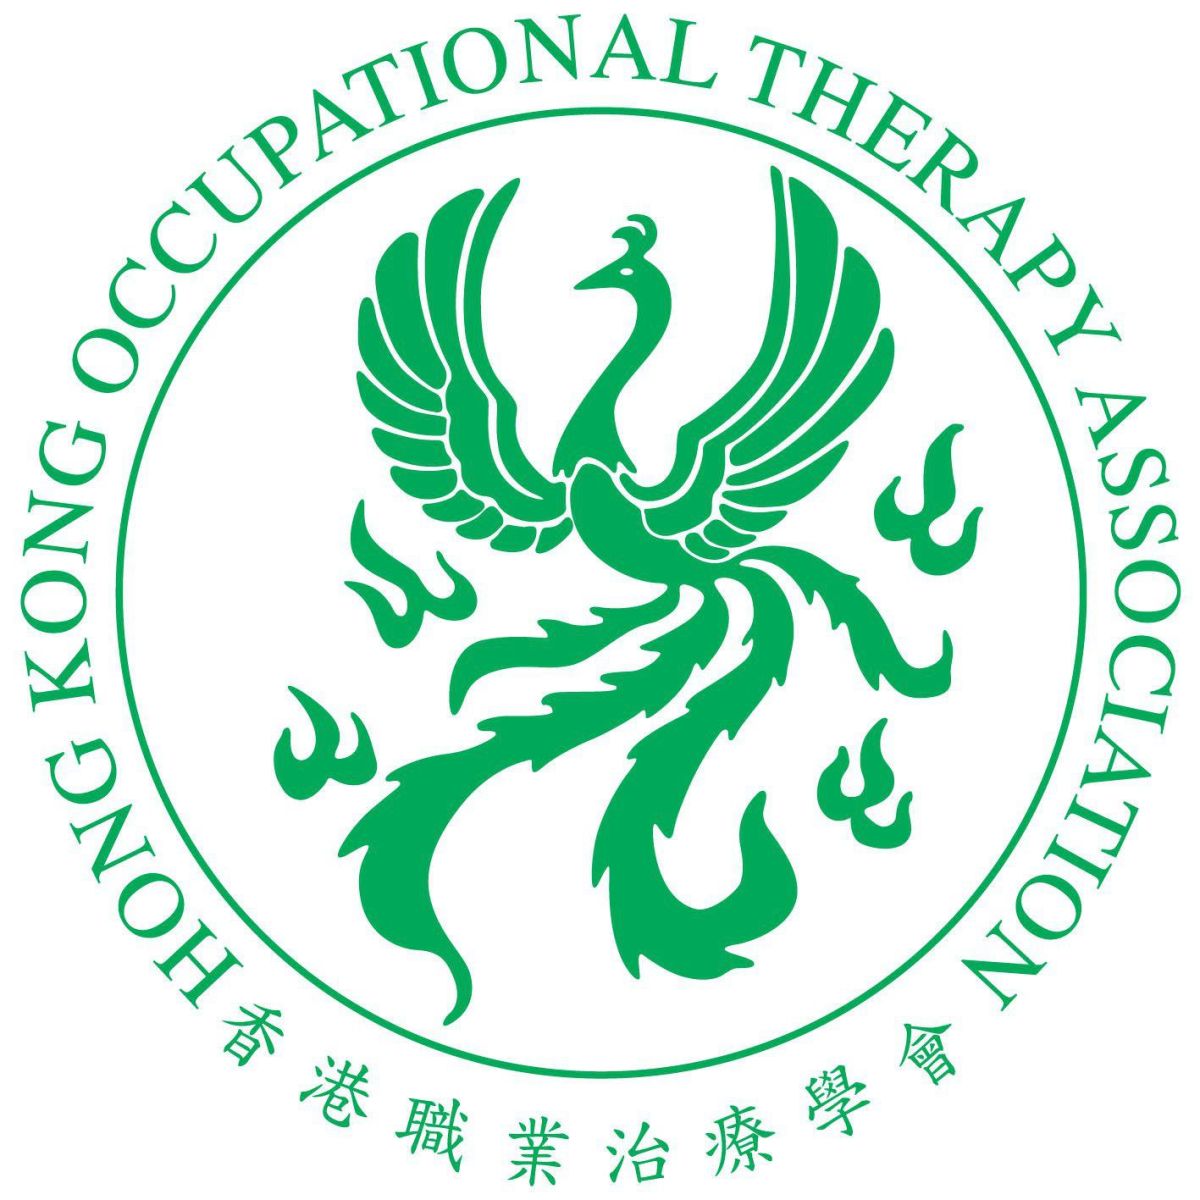 Hong Kong Occupational Therapy Association